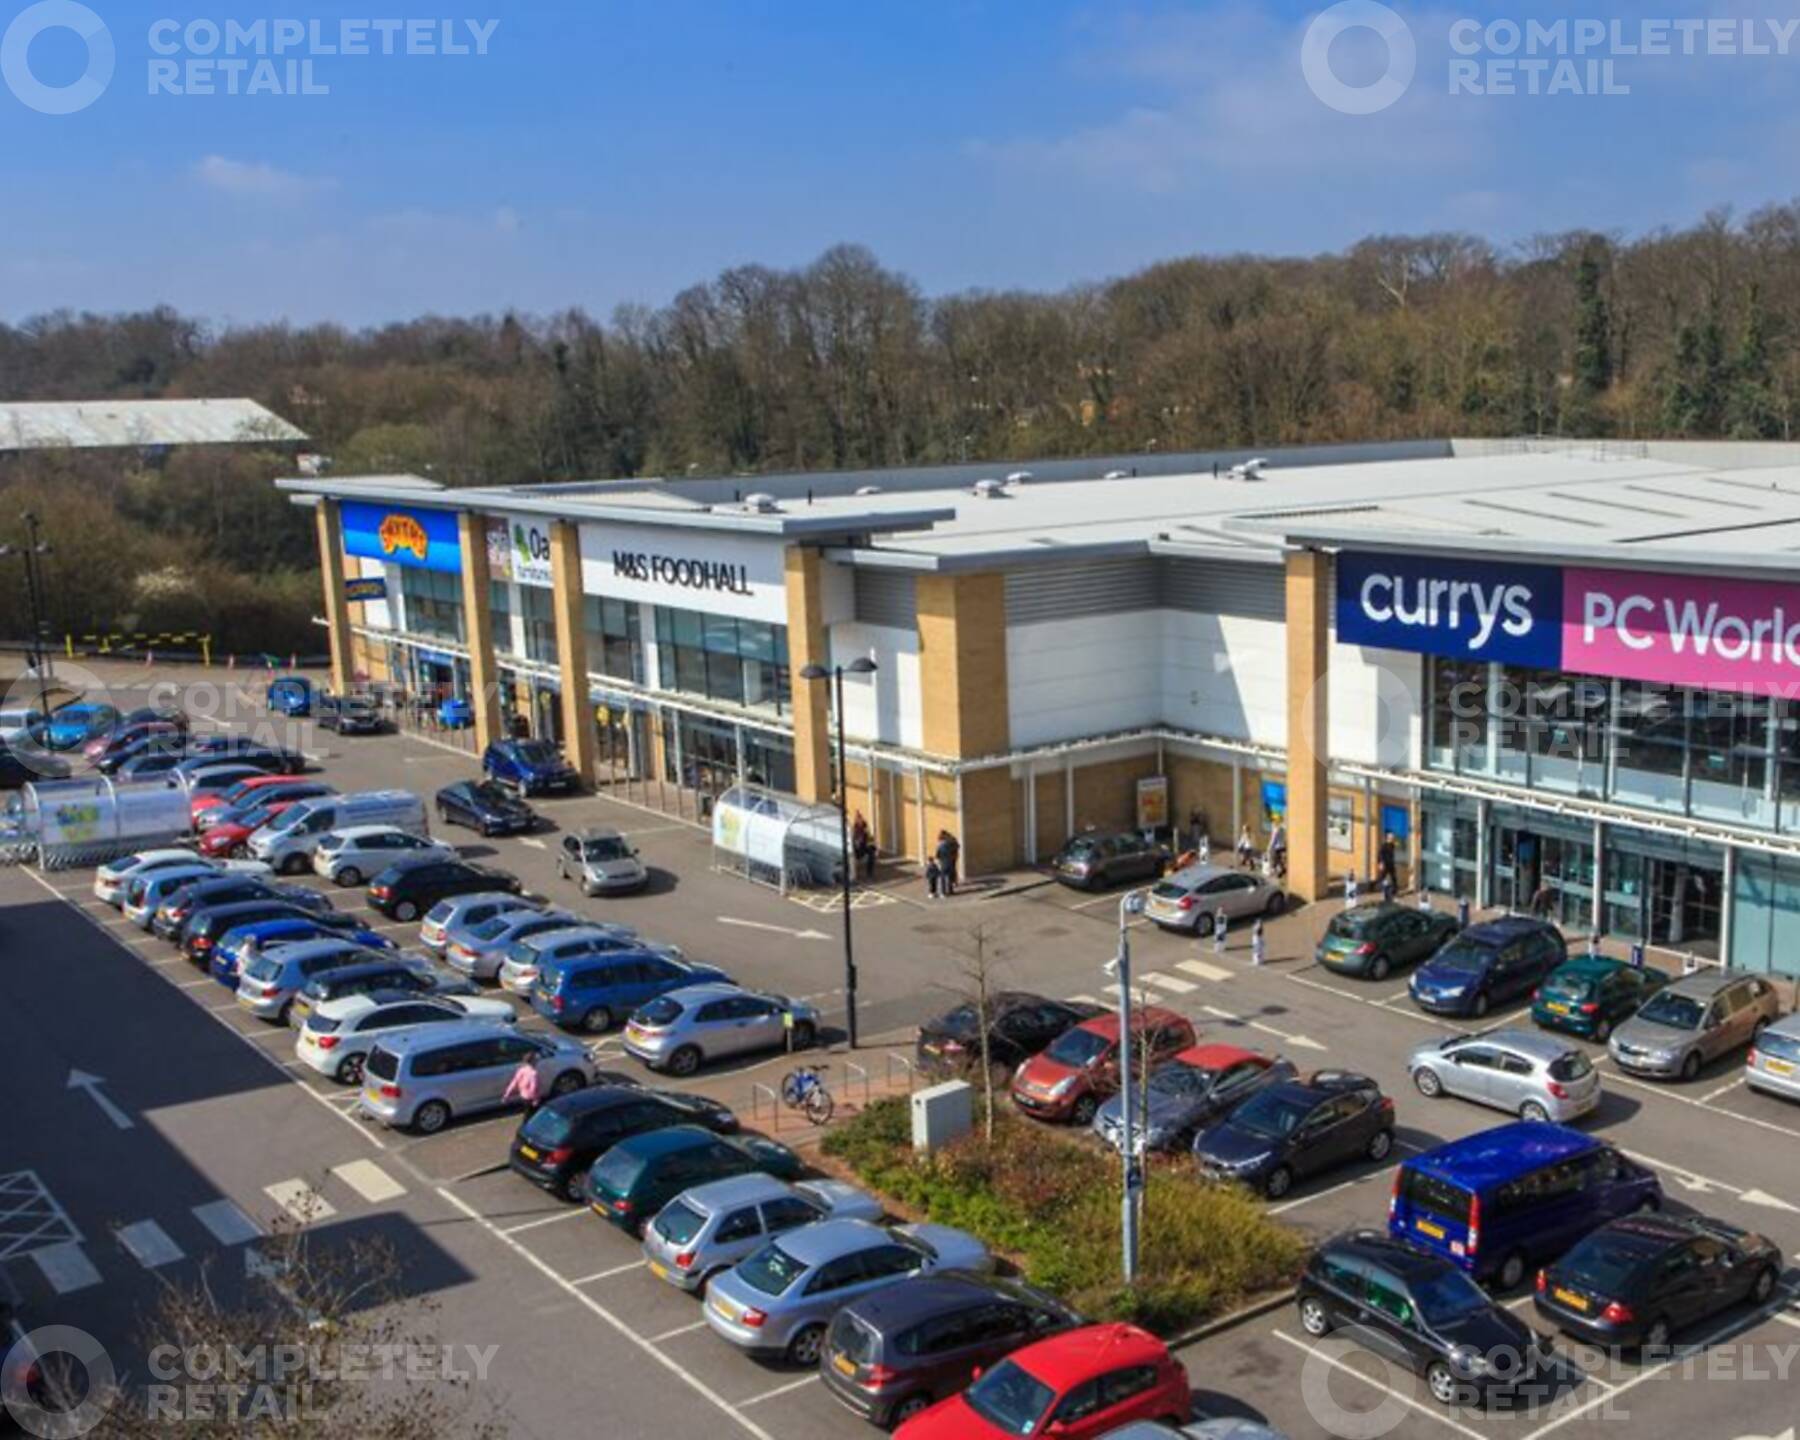 South Aylesford Retail Park